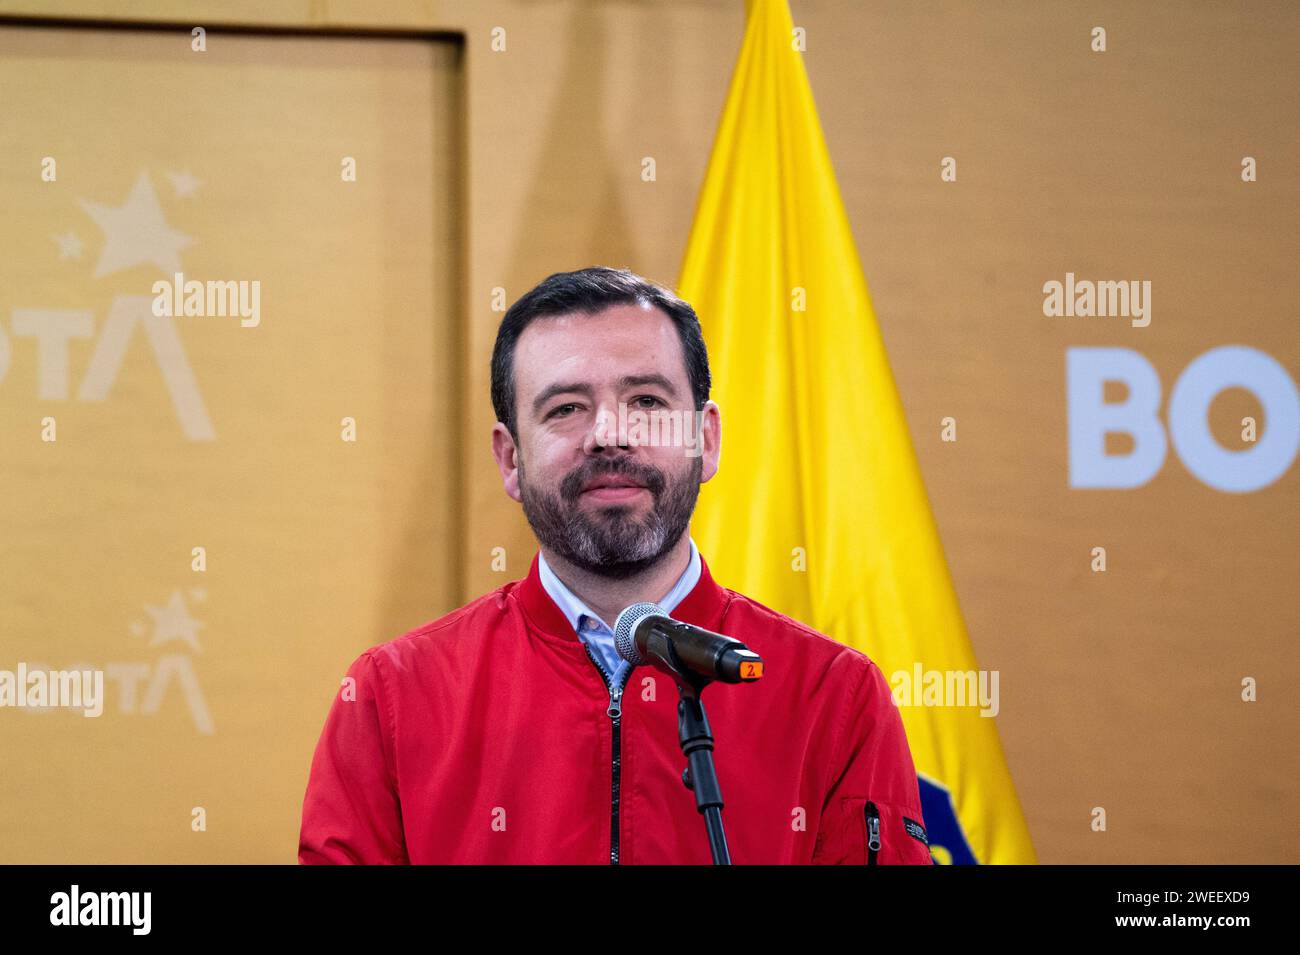 Bogota's mayor-elect Carlos Fernando Galan during a press conference after a meeting between the Bogota's mayor Claudia Lopez and mayor-elect Carlos F Stock Photo